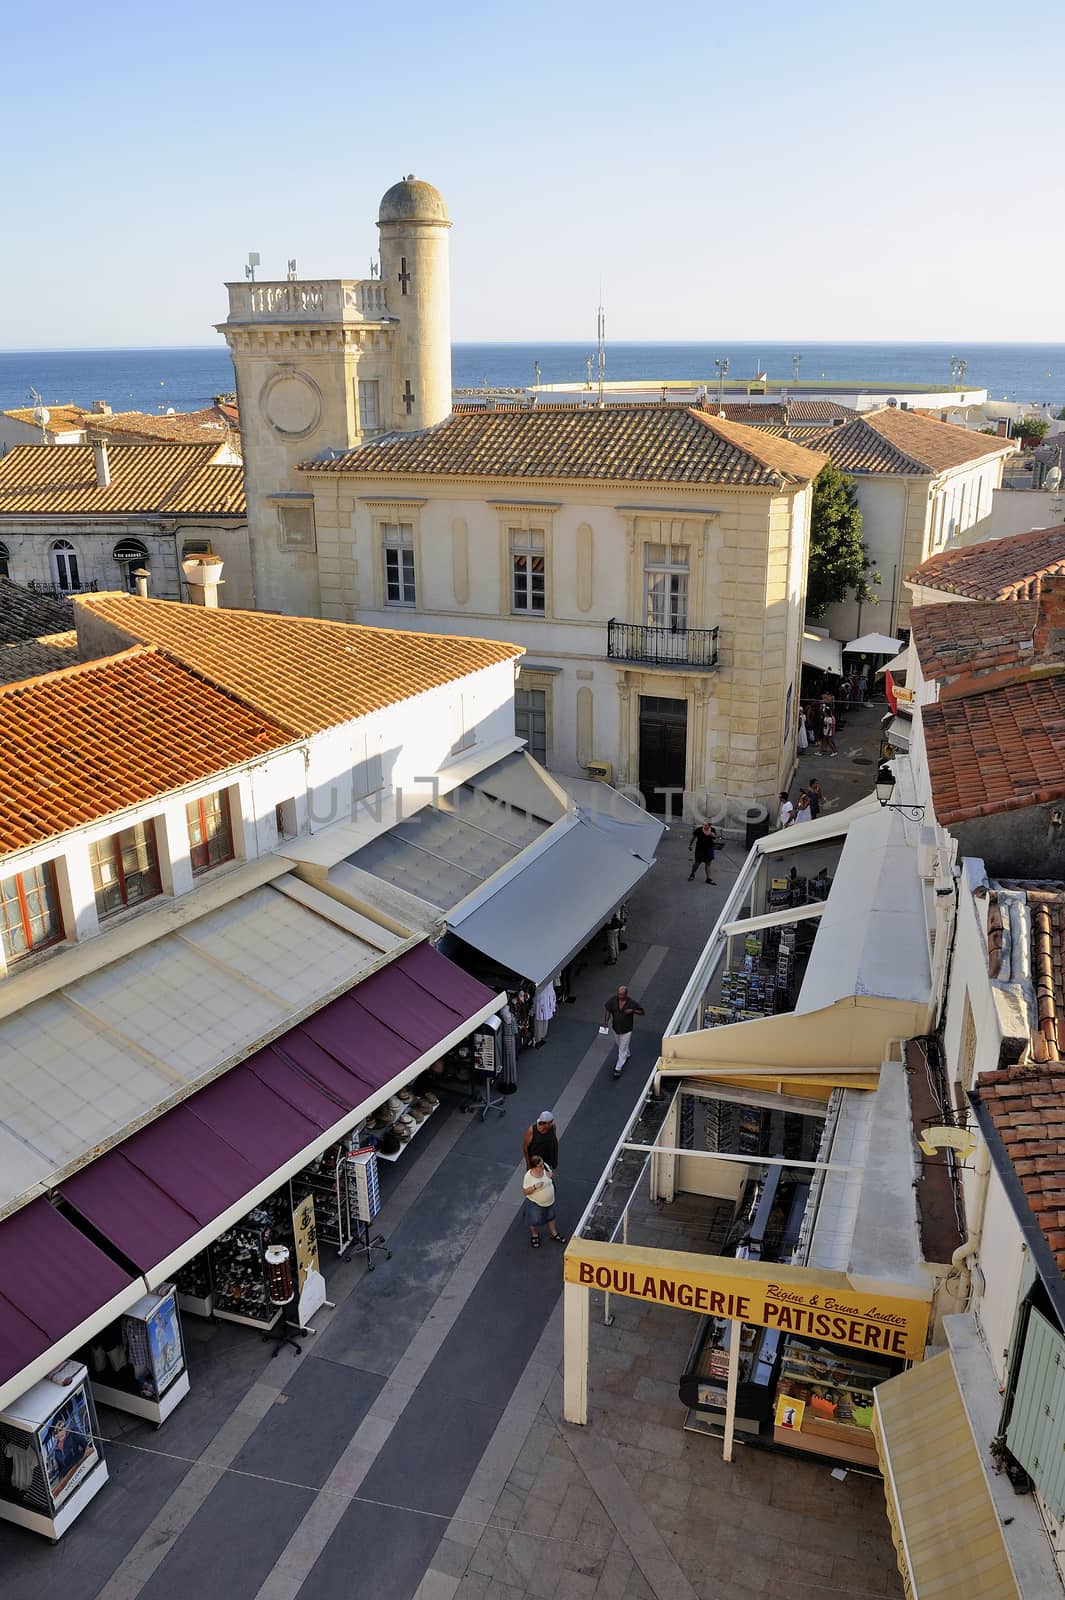 A pedestrian street of Saintes-Maries-de-la-Mer view from the roof of the church.